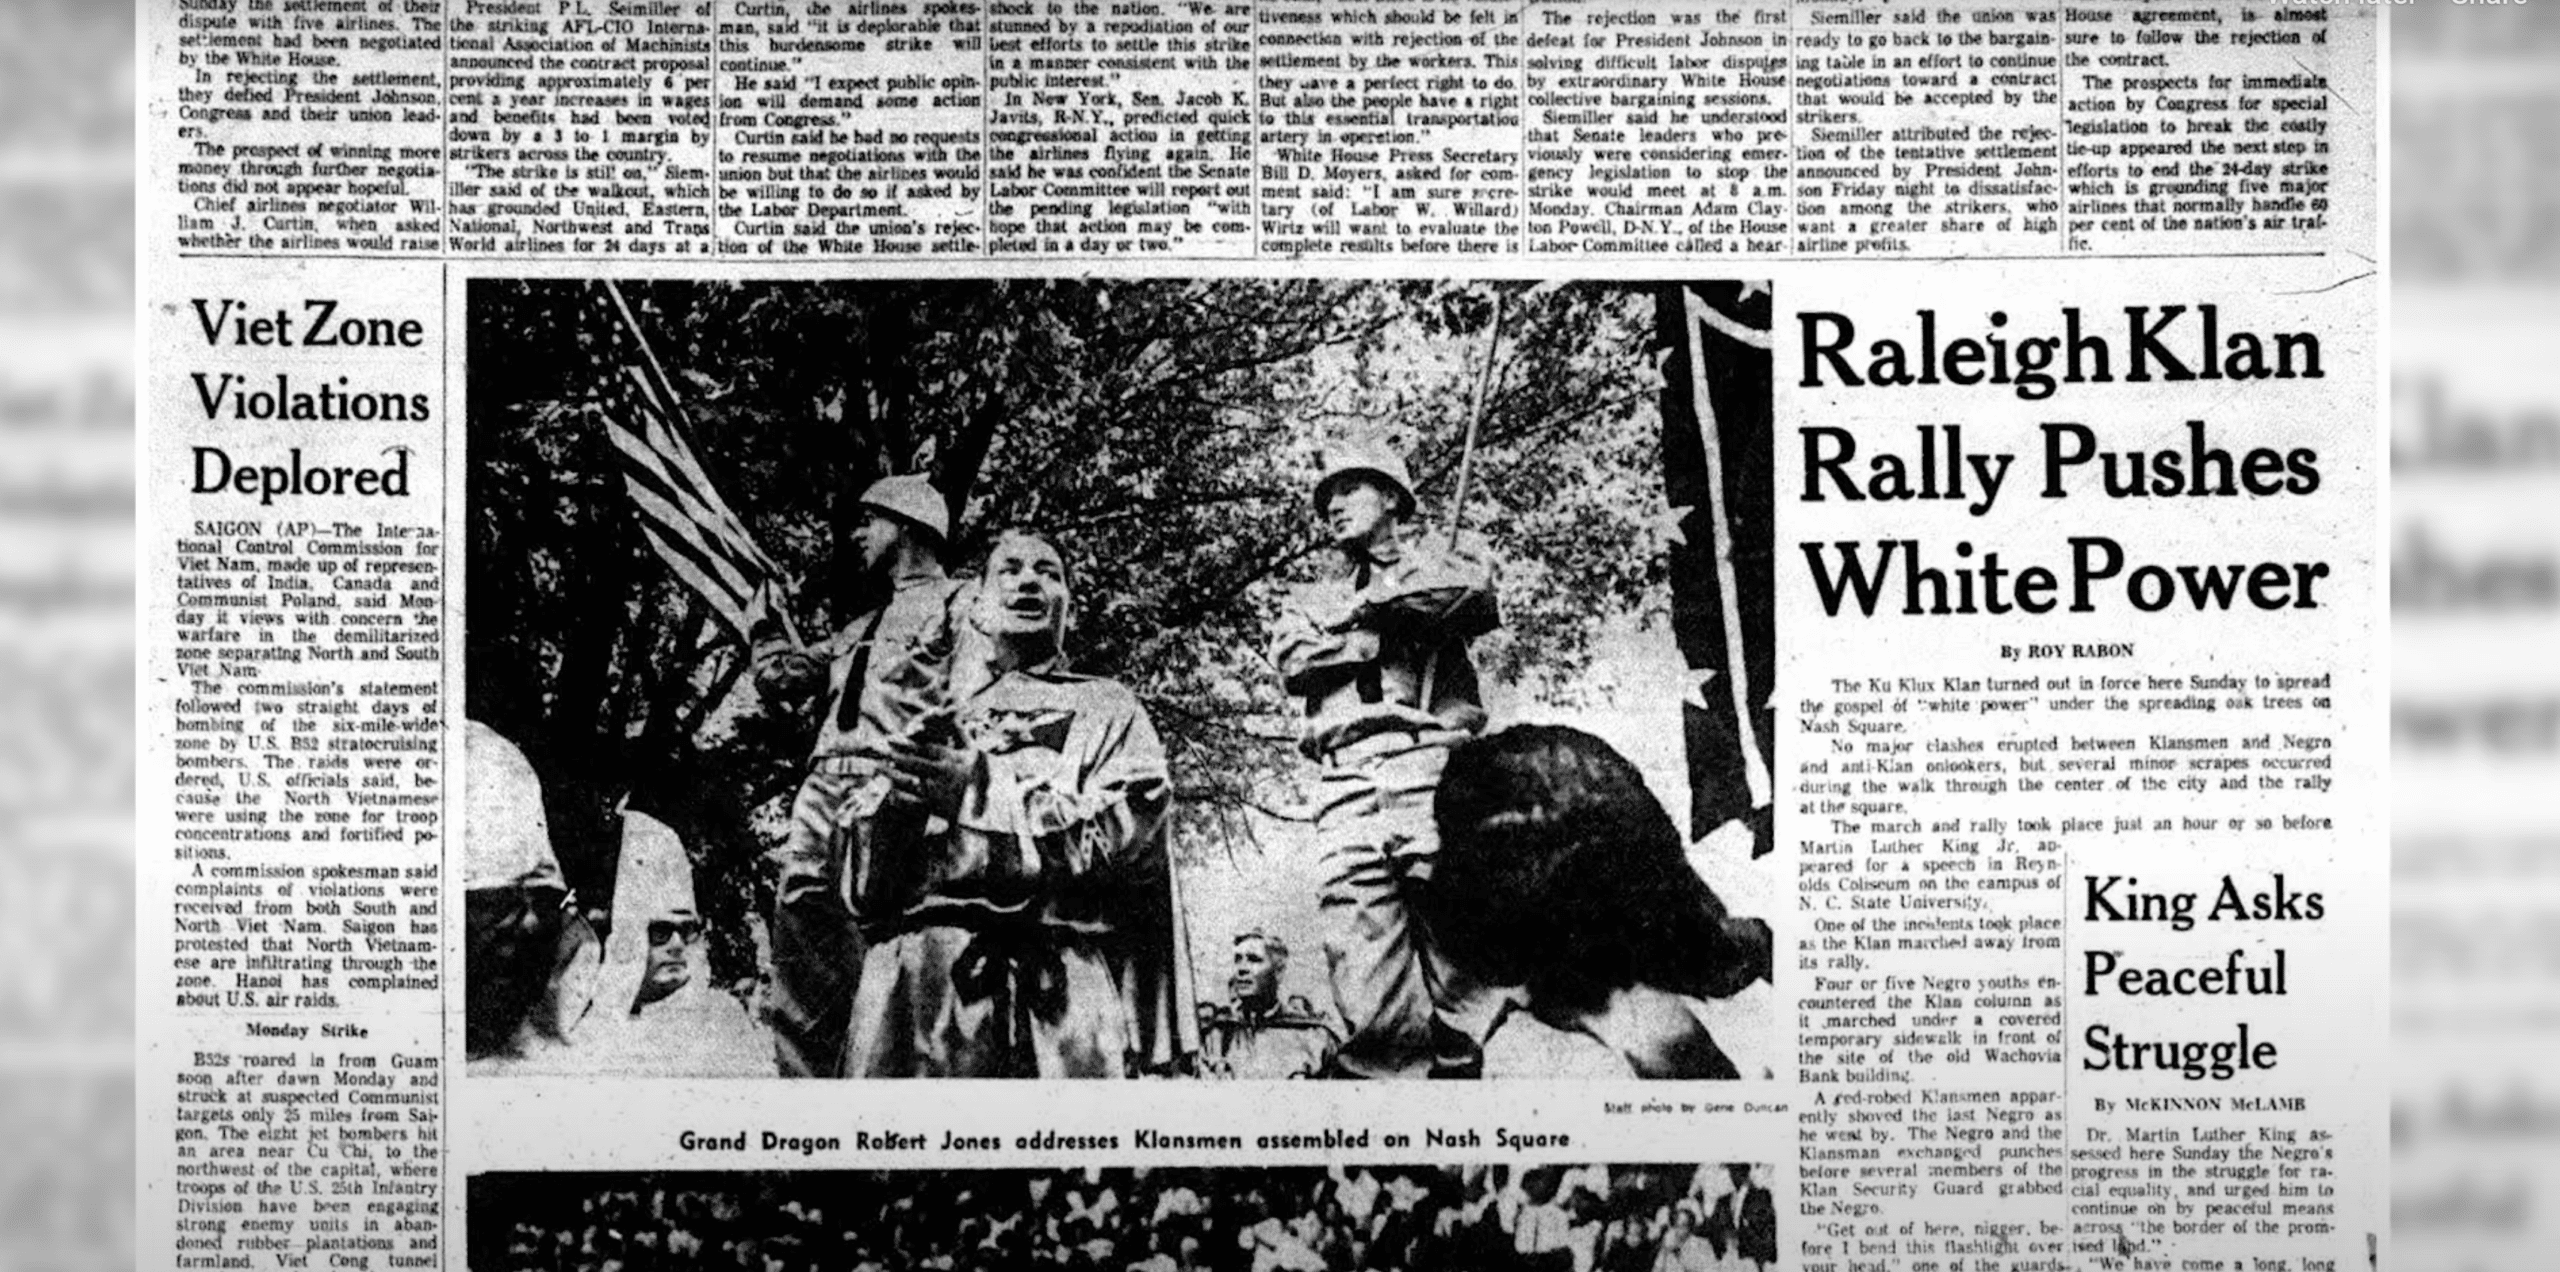 A newspaper clipping from July 1966 with the headline "Raleigh Klan Rally Pushes White Power" and the smaller subheading "King Asks Peaceful Struggle."